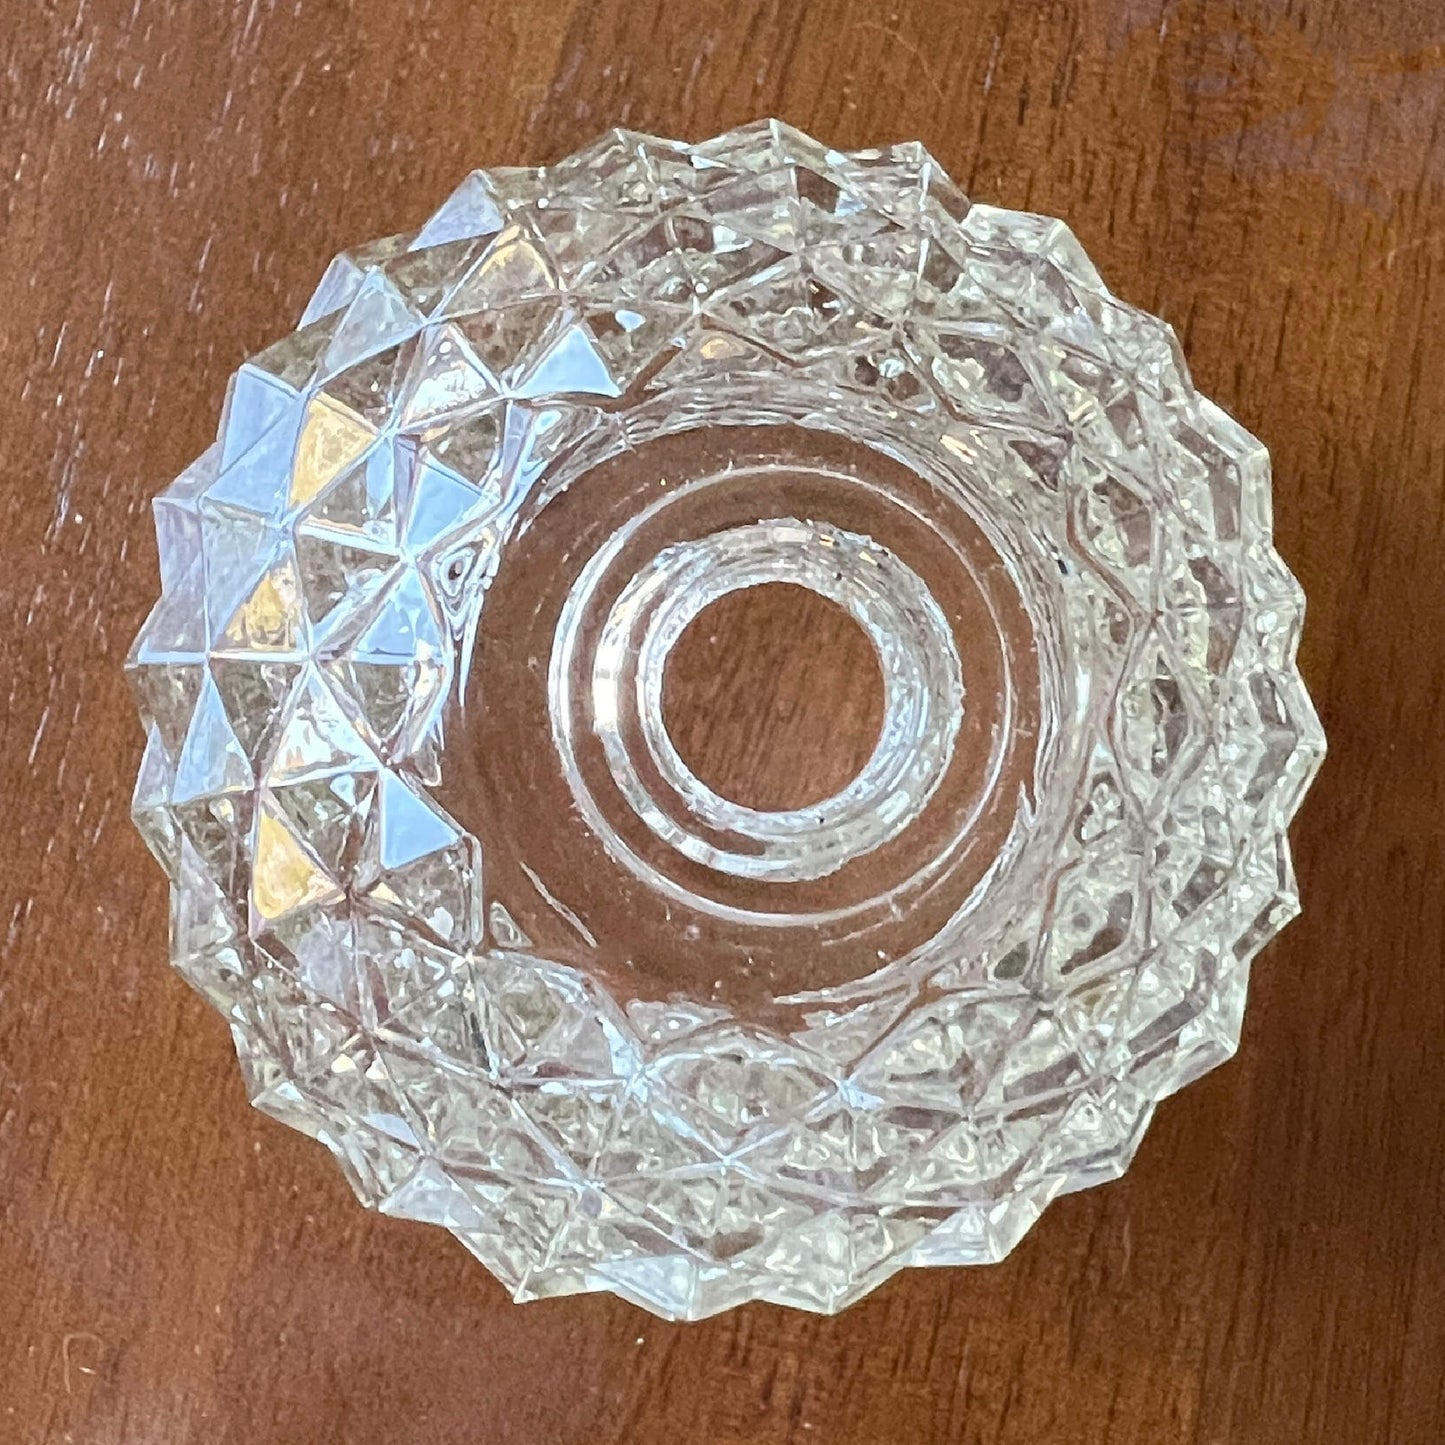 Vintage-Faceted-Dome-Shape-Crystal-Glass-Replacement-Shade-Top-View.-Shop-eBargainsAndDeals.com